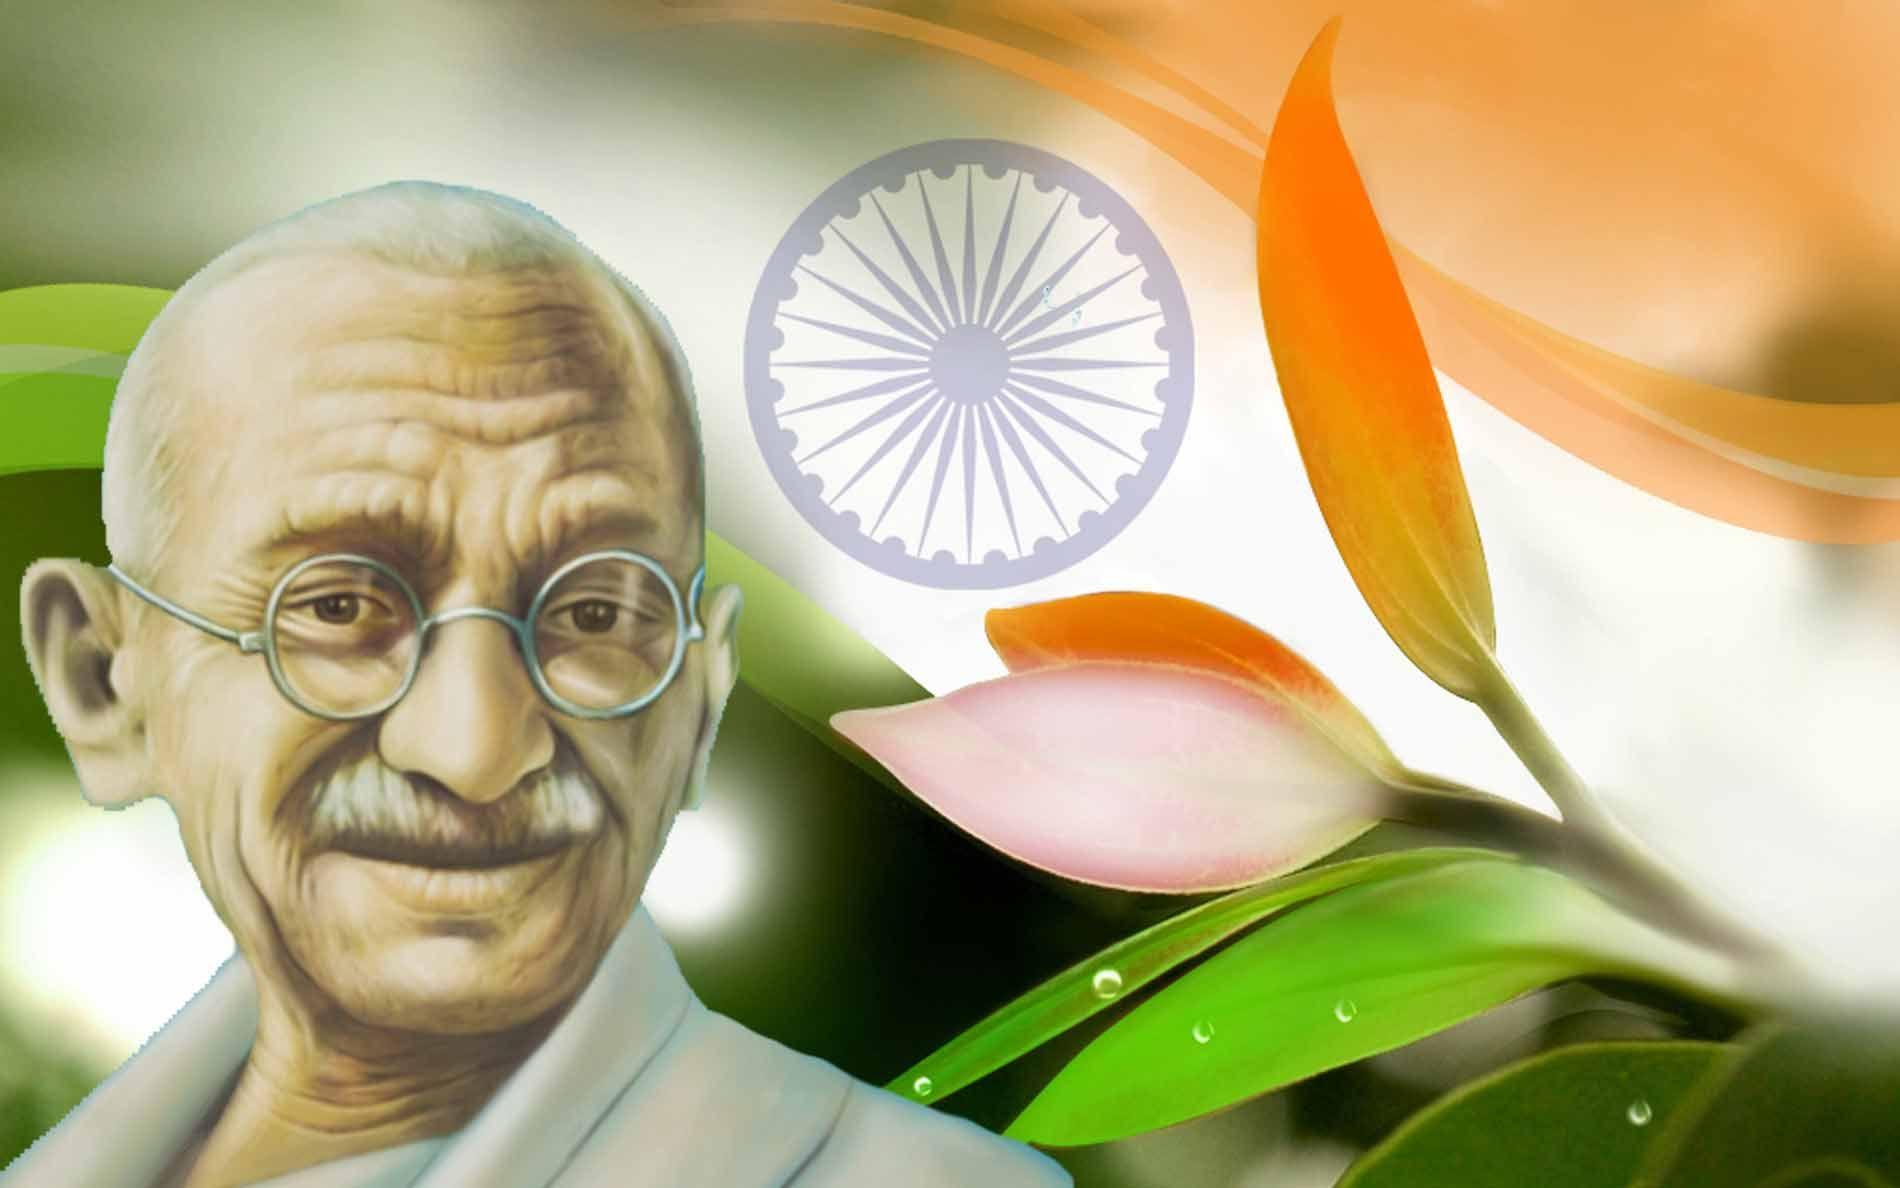 Happy Gandhi Jayanthi Image, Quotes by Father of Nation Mohandas